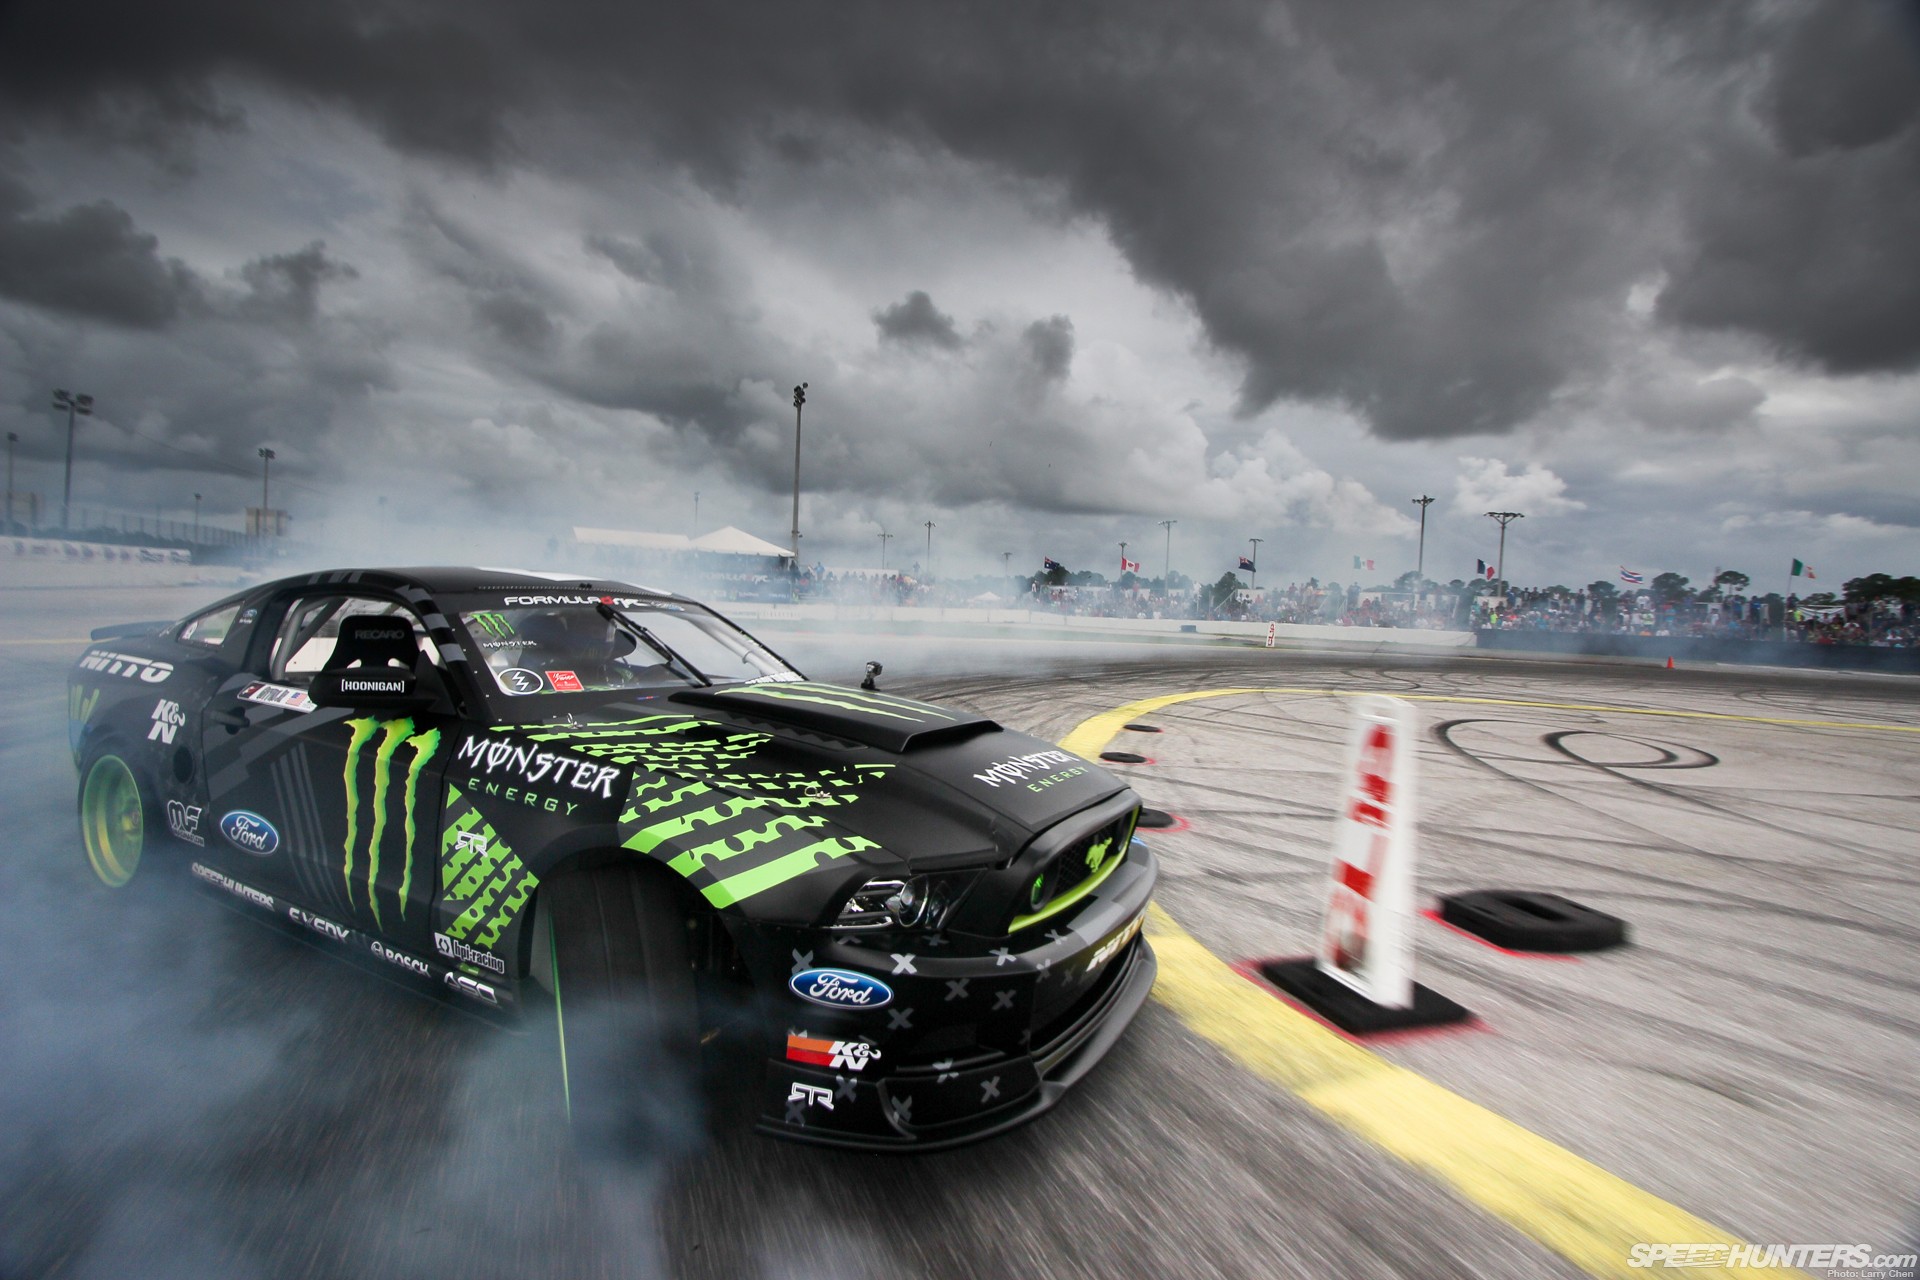 Drift pc. Monster Energy Ford Mustang RTR. Форд Мустанг дрифт. Ford Mustang Drift Monster Energy. Мустанг РТР Монстер.